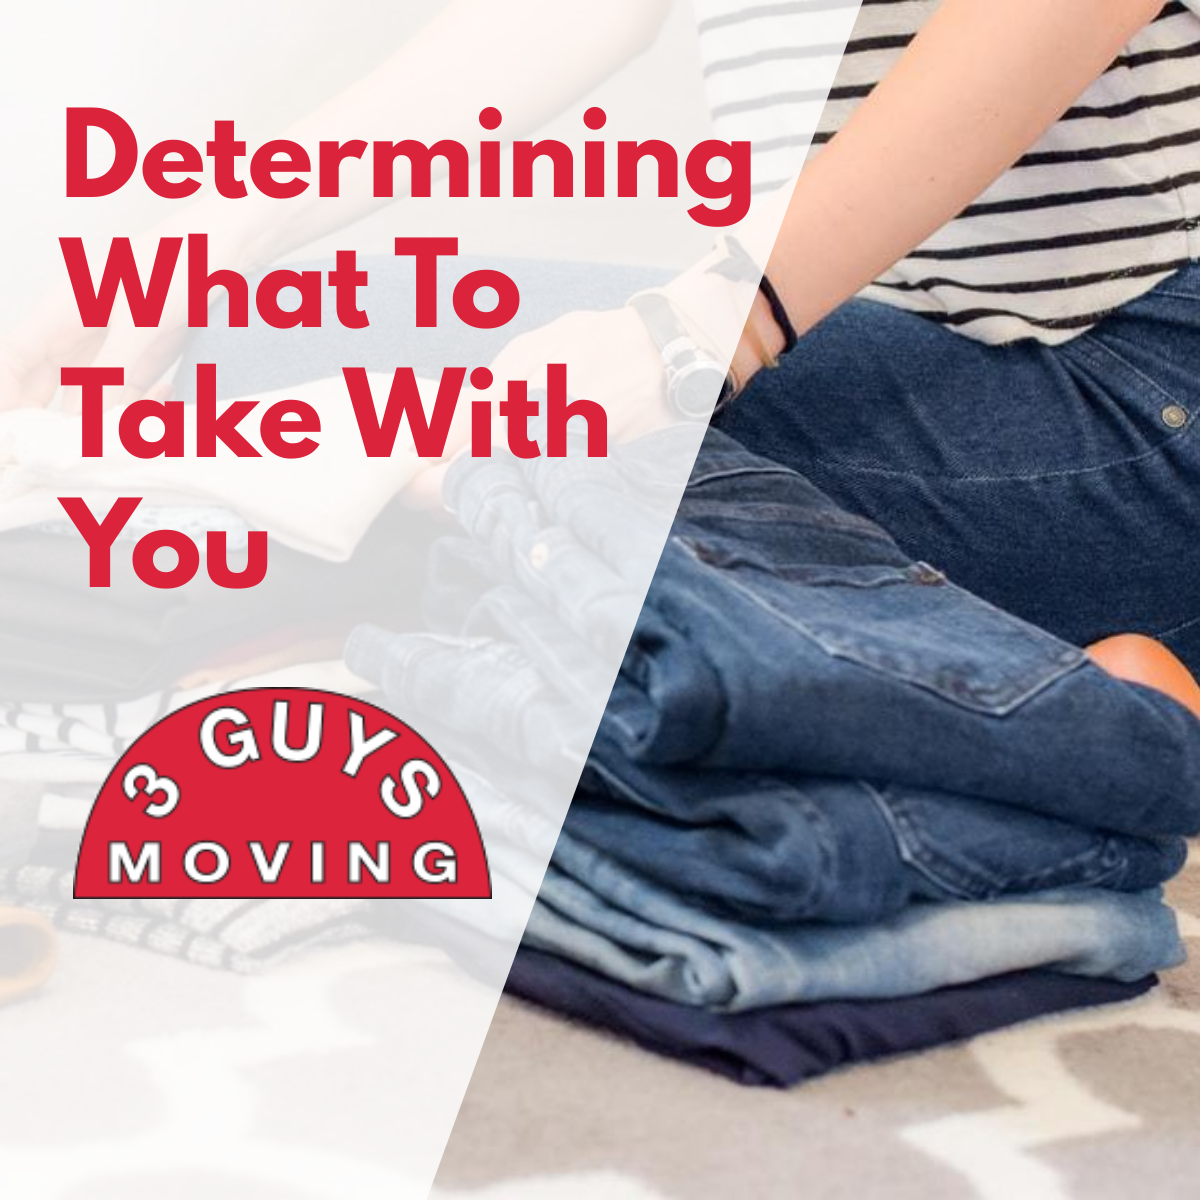 Determining What To Take With You  - Determining What To Take With You